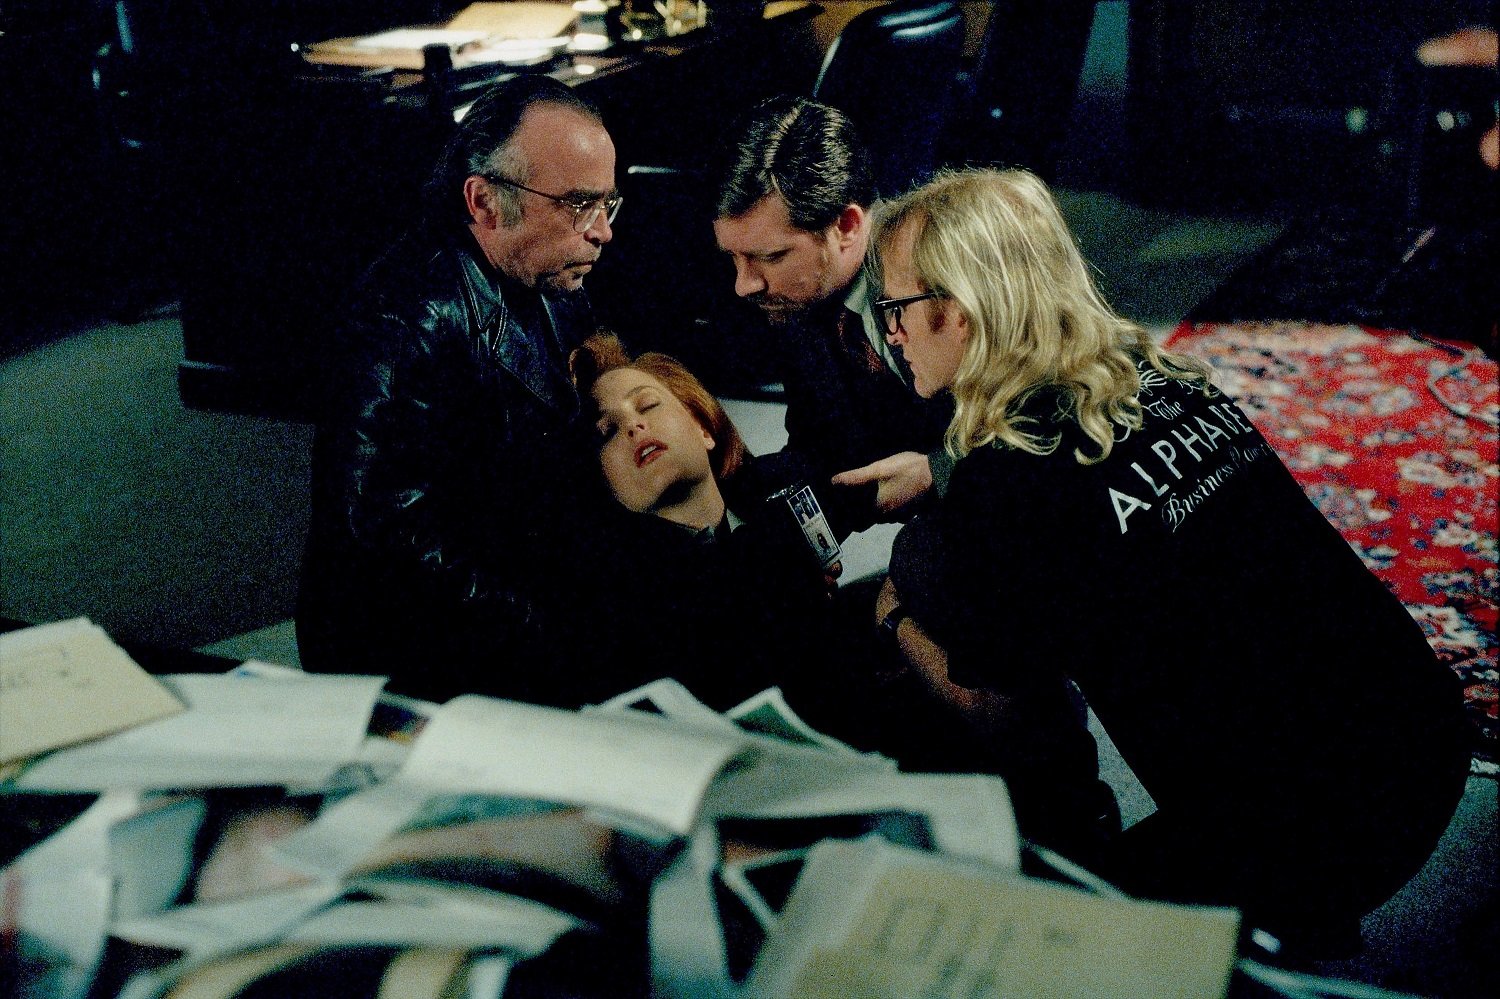 Agent Scully (Gillian Anderson, C) is saved from a fall by The Lone Gunmen (L-R: Tom Braidwood as Frohike, Bruce Harwood as Byers, and Dean Haglund as Langley) in The X-Files